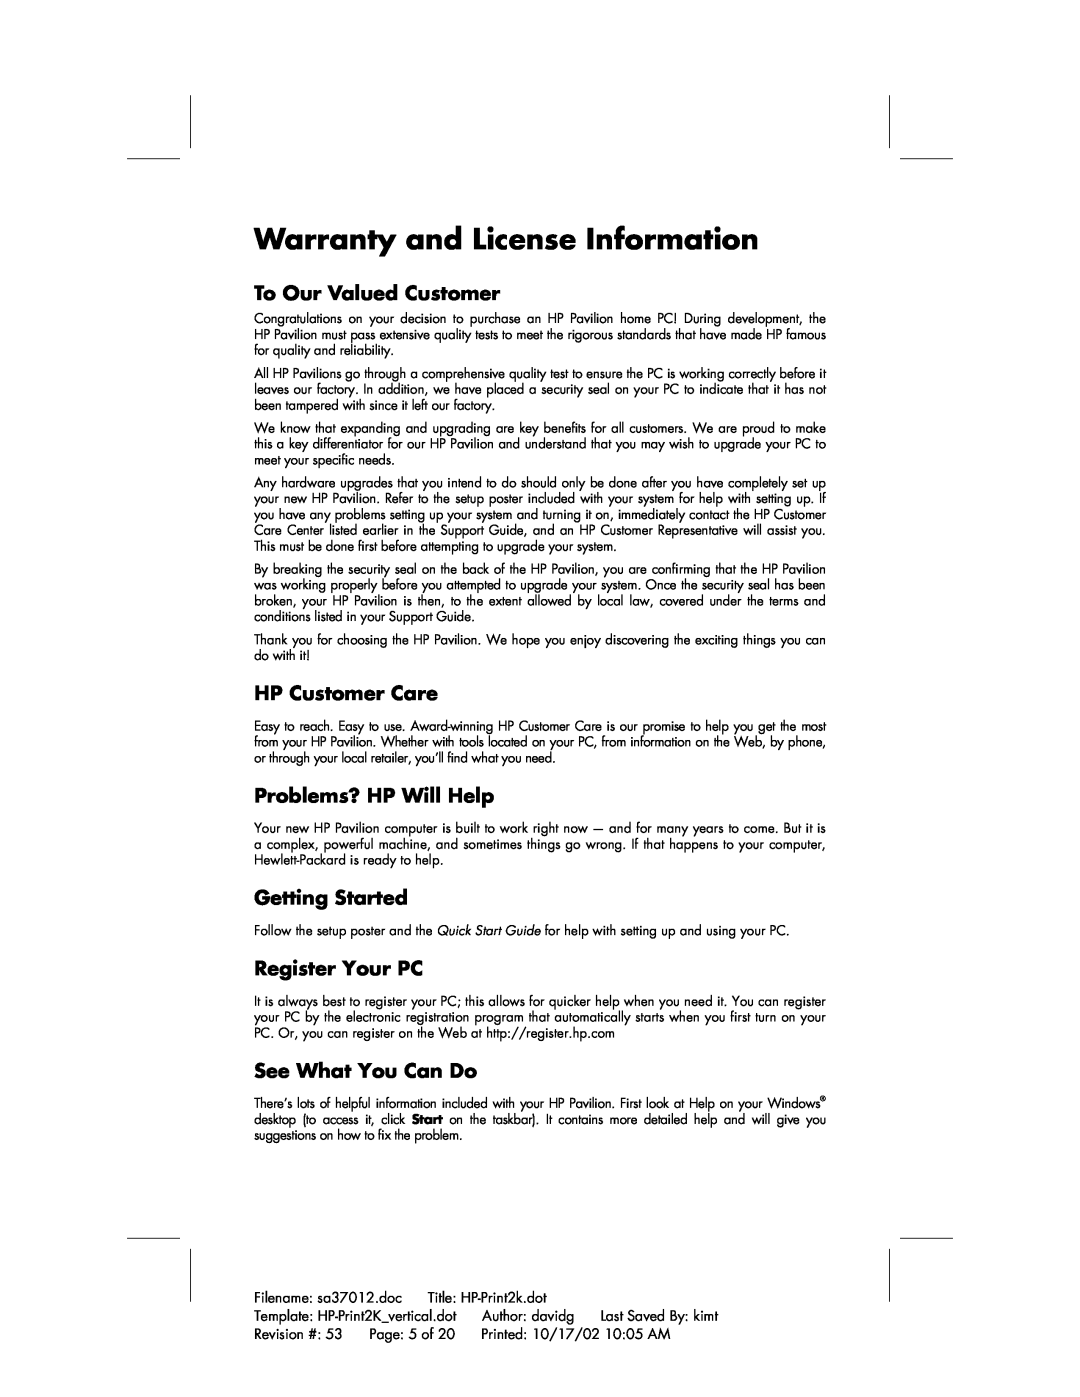 HP 704d (AP) Warranty and License Information, To Our Valued Customer, HP Customer Care, Problems? HP Will Help, Page 5 of 